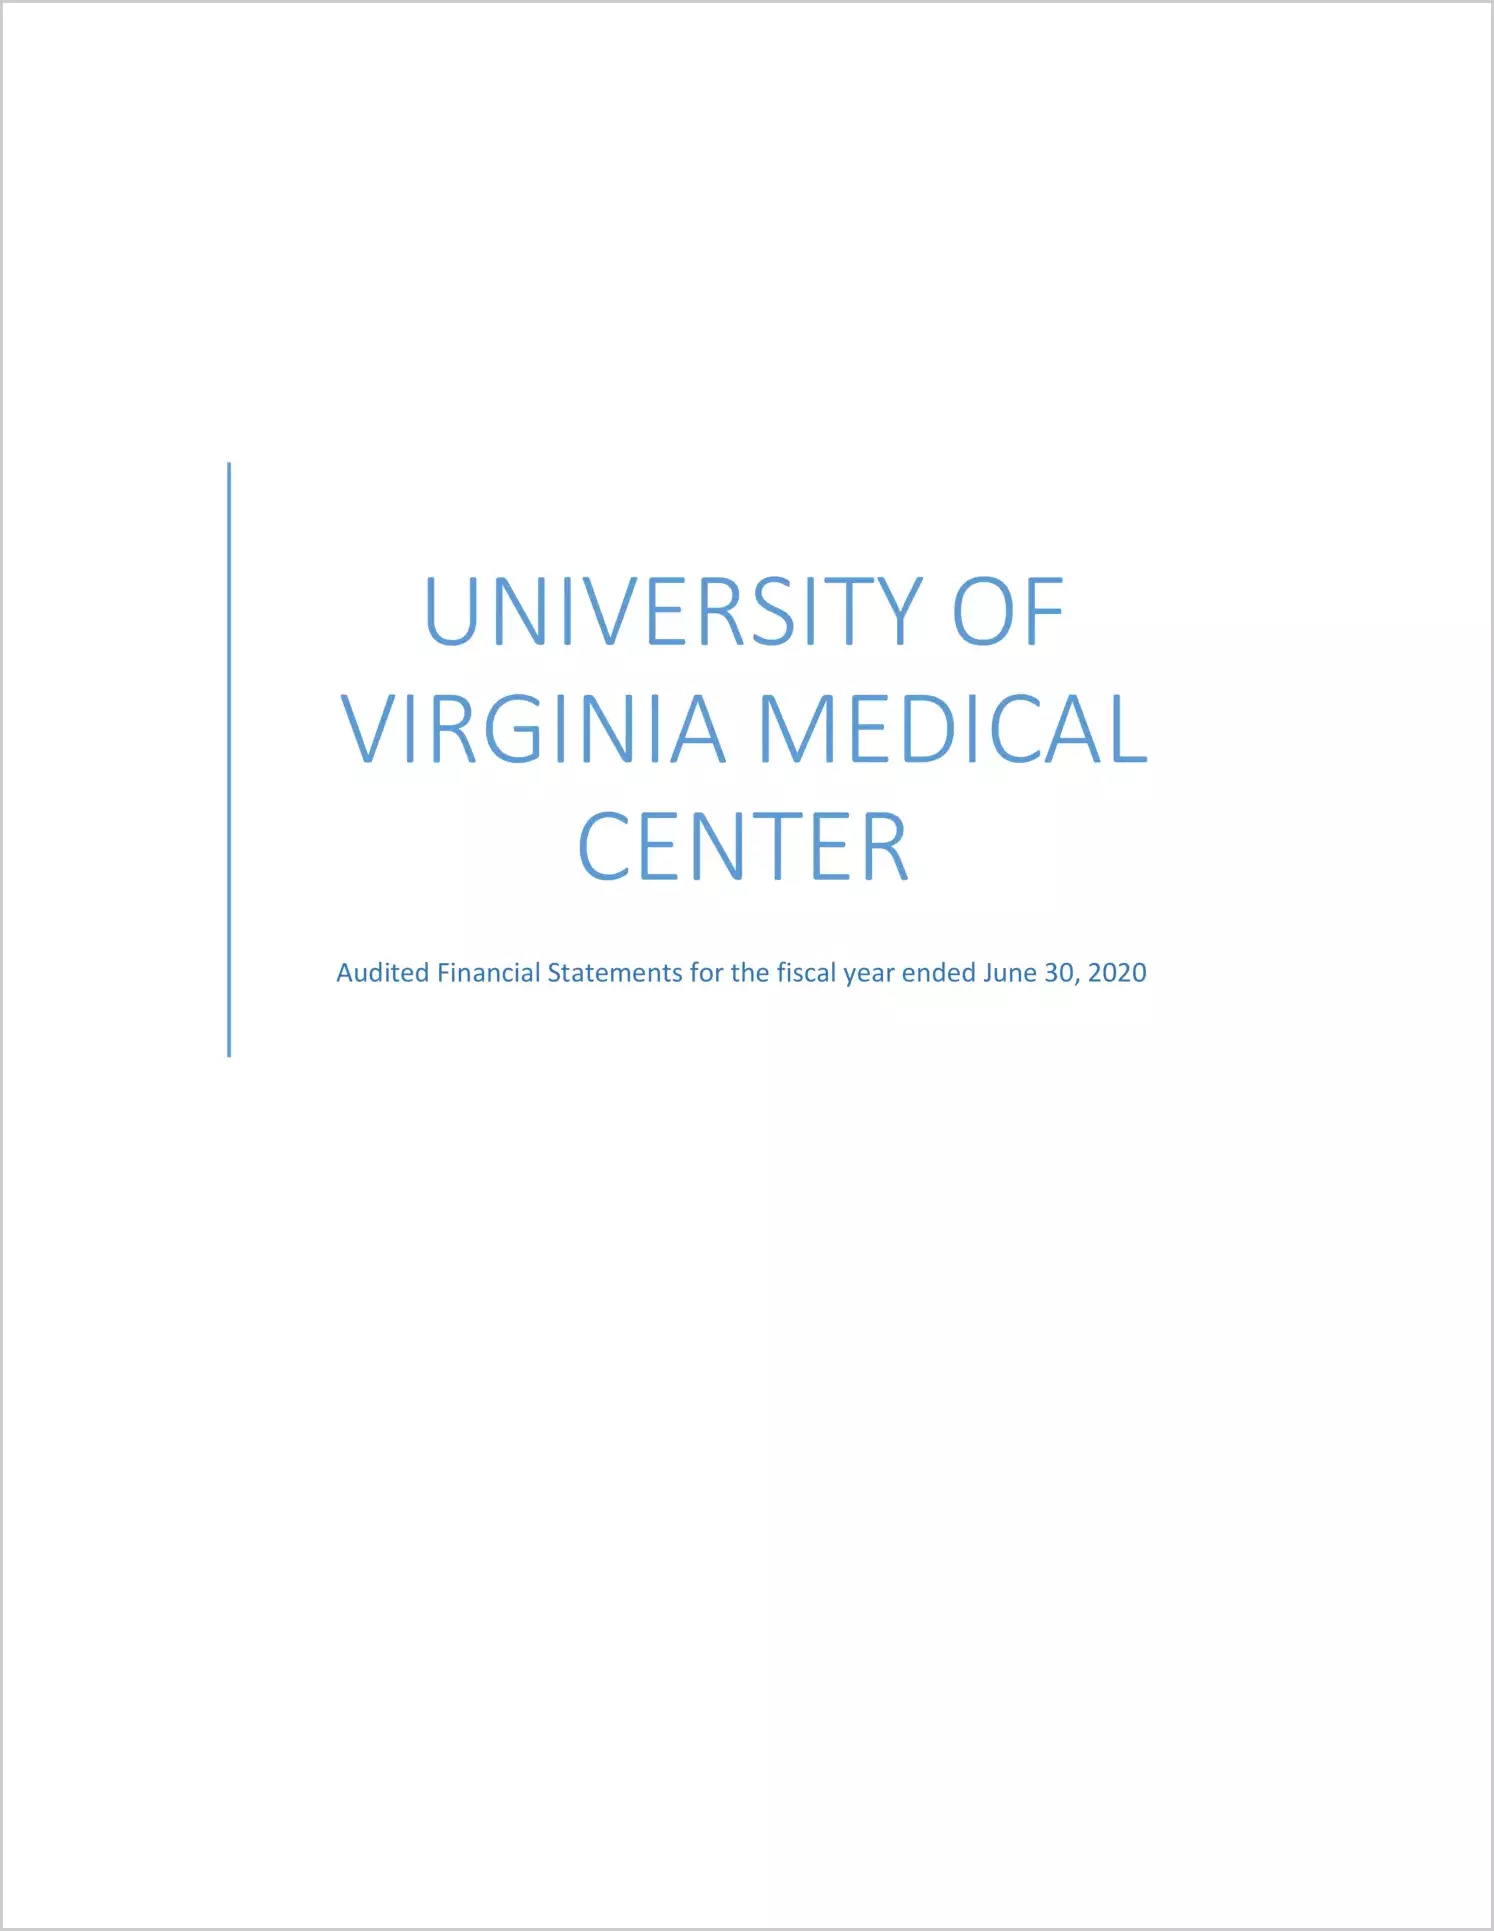 University of Virginia Medical Center Financial Statements for the year ended June 30, 2020